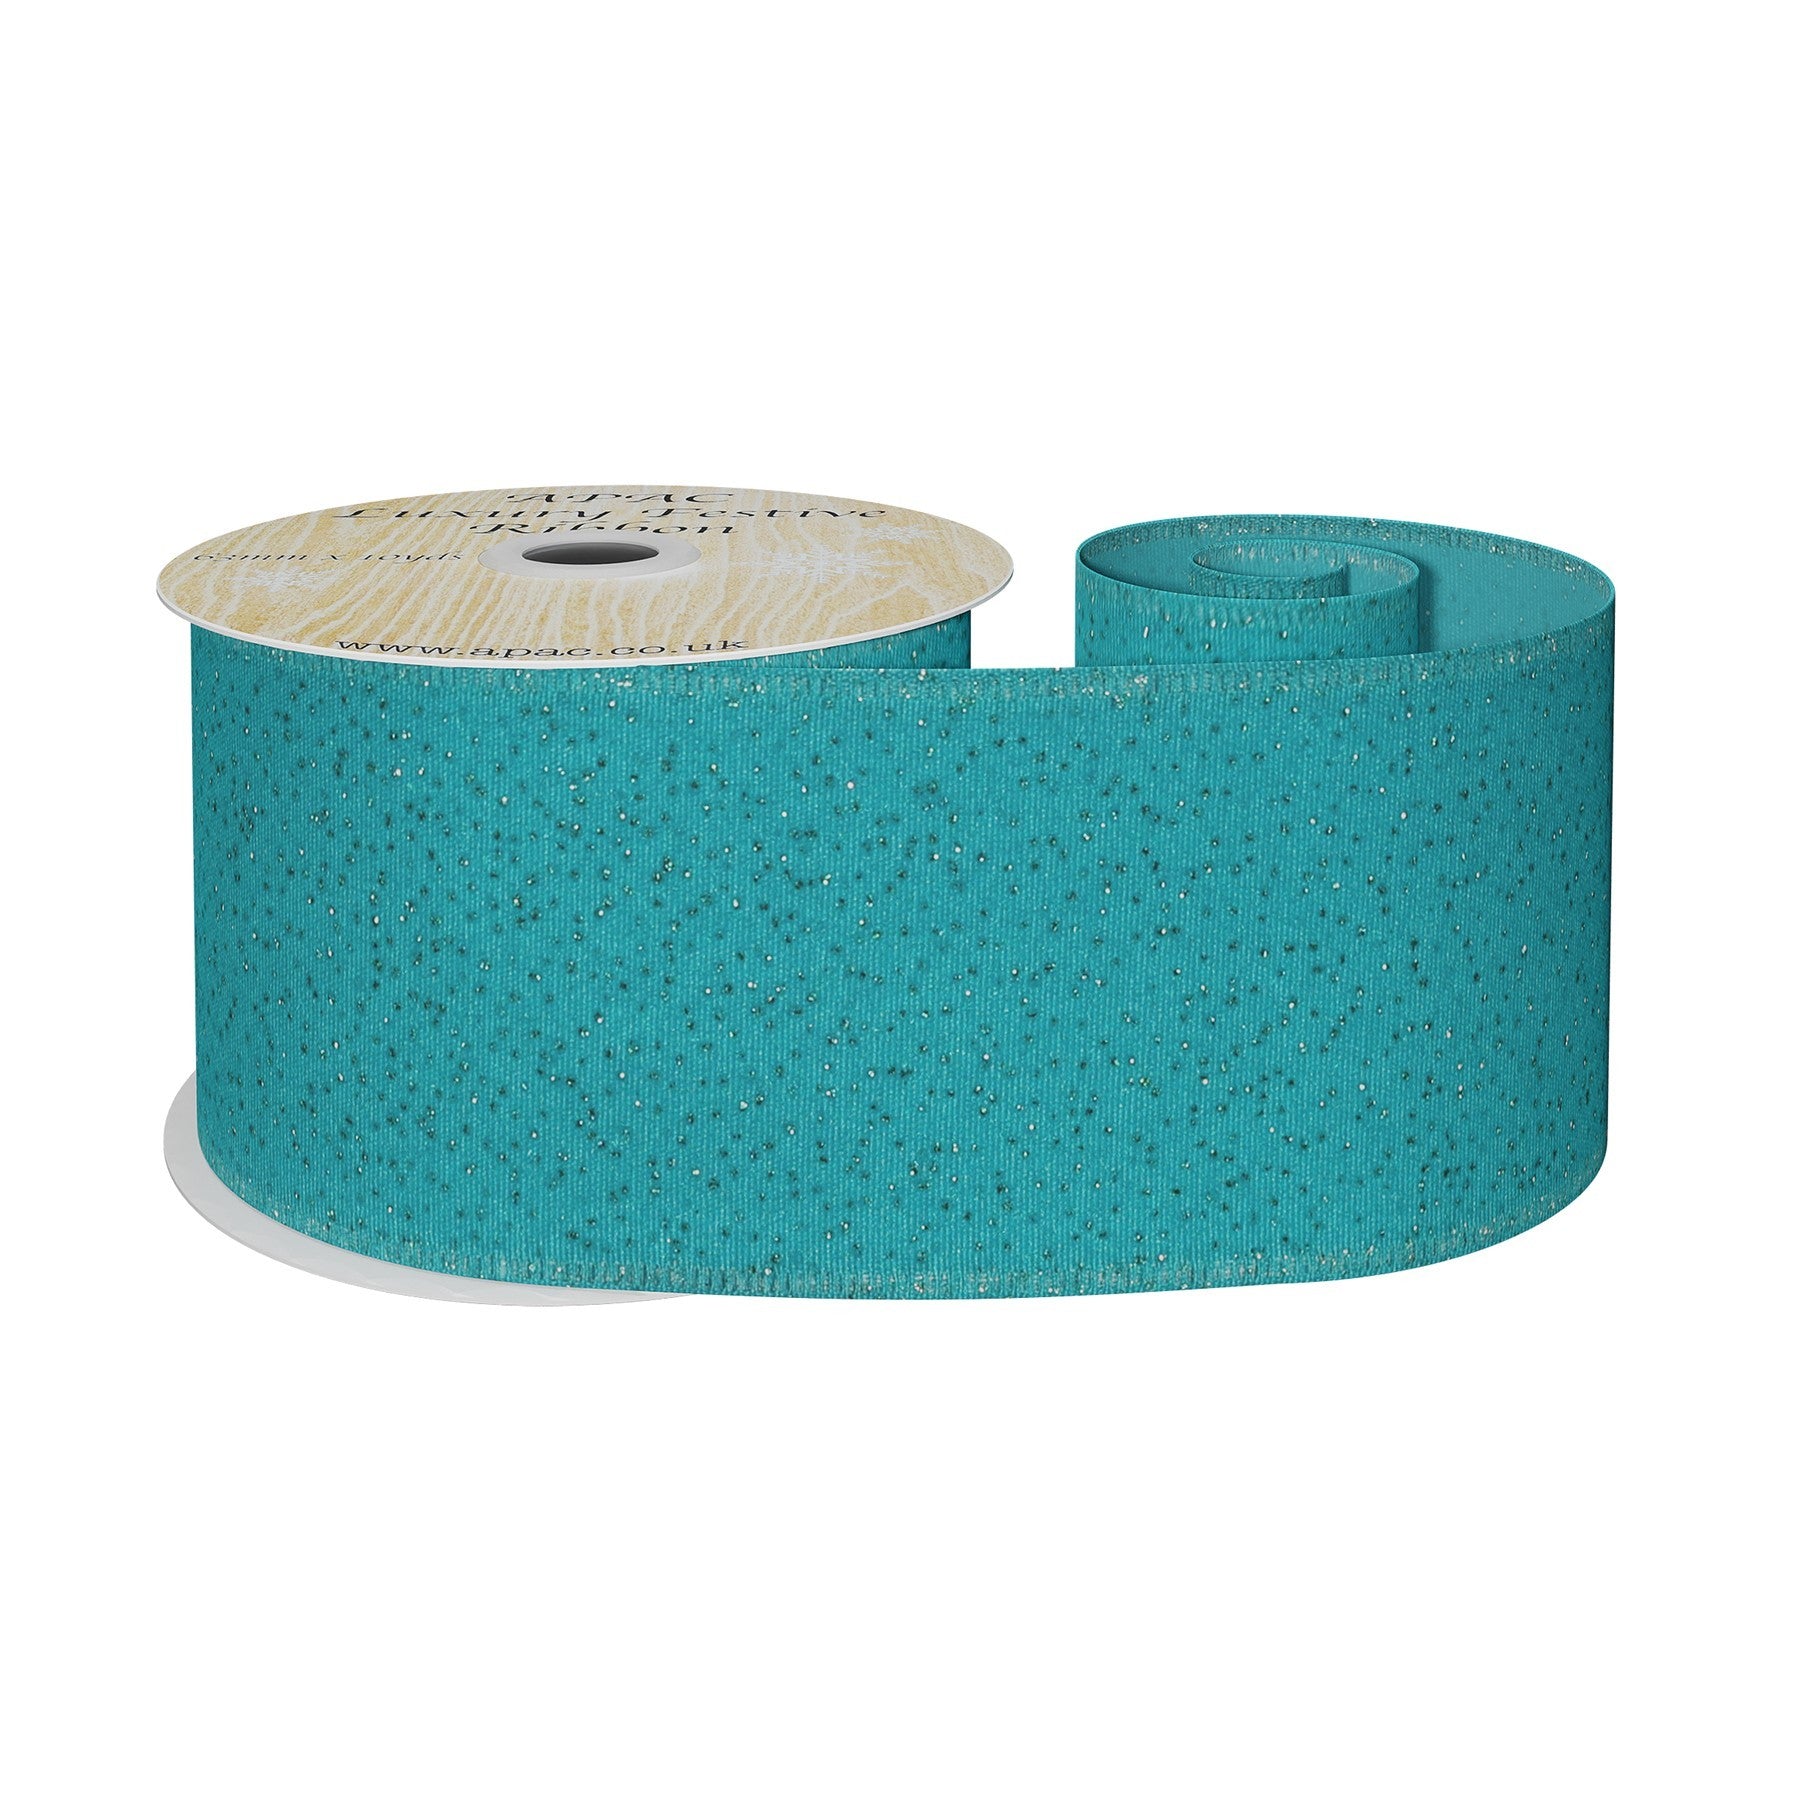 View Turquoise Ribbon with Blue Sparkles 63mm x 10yd information